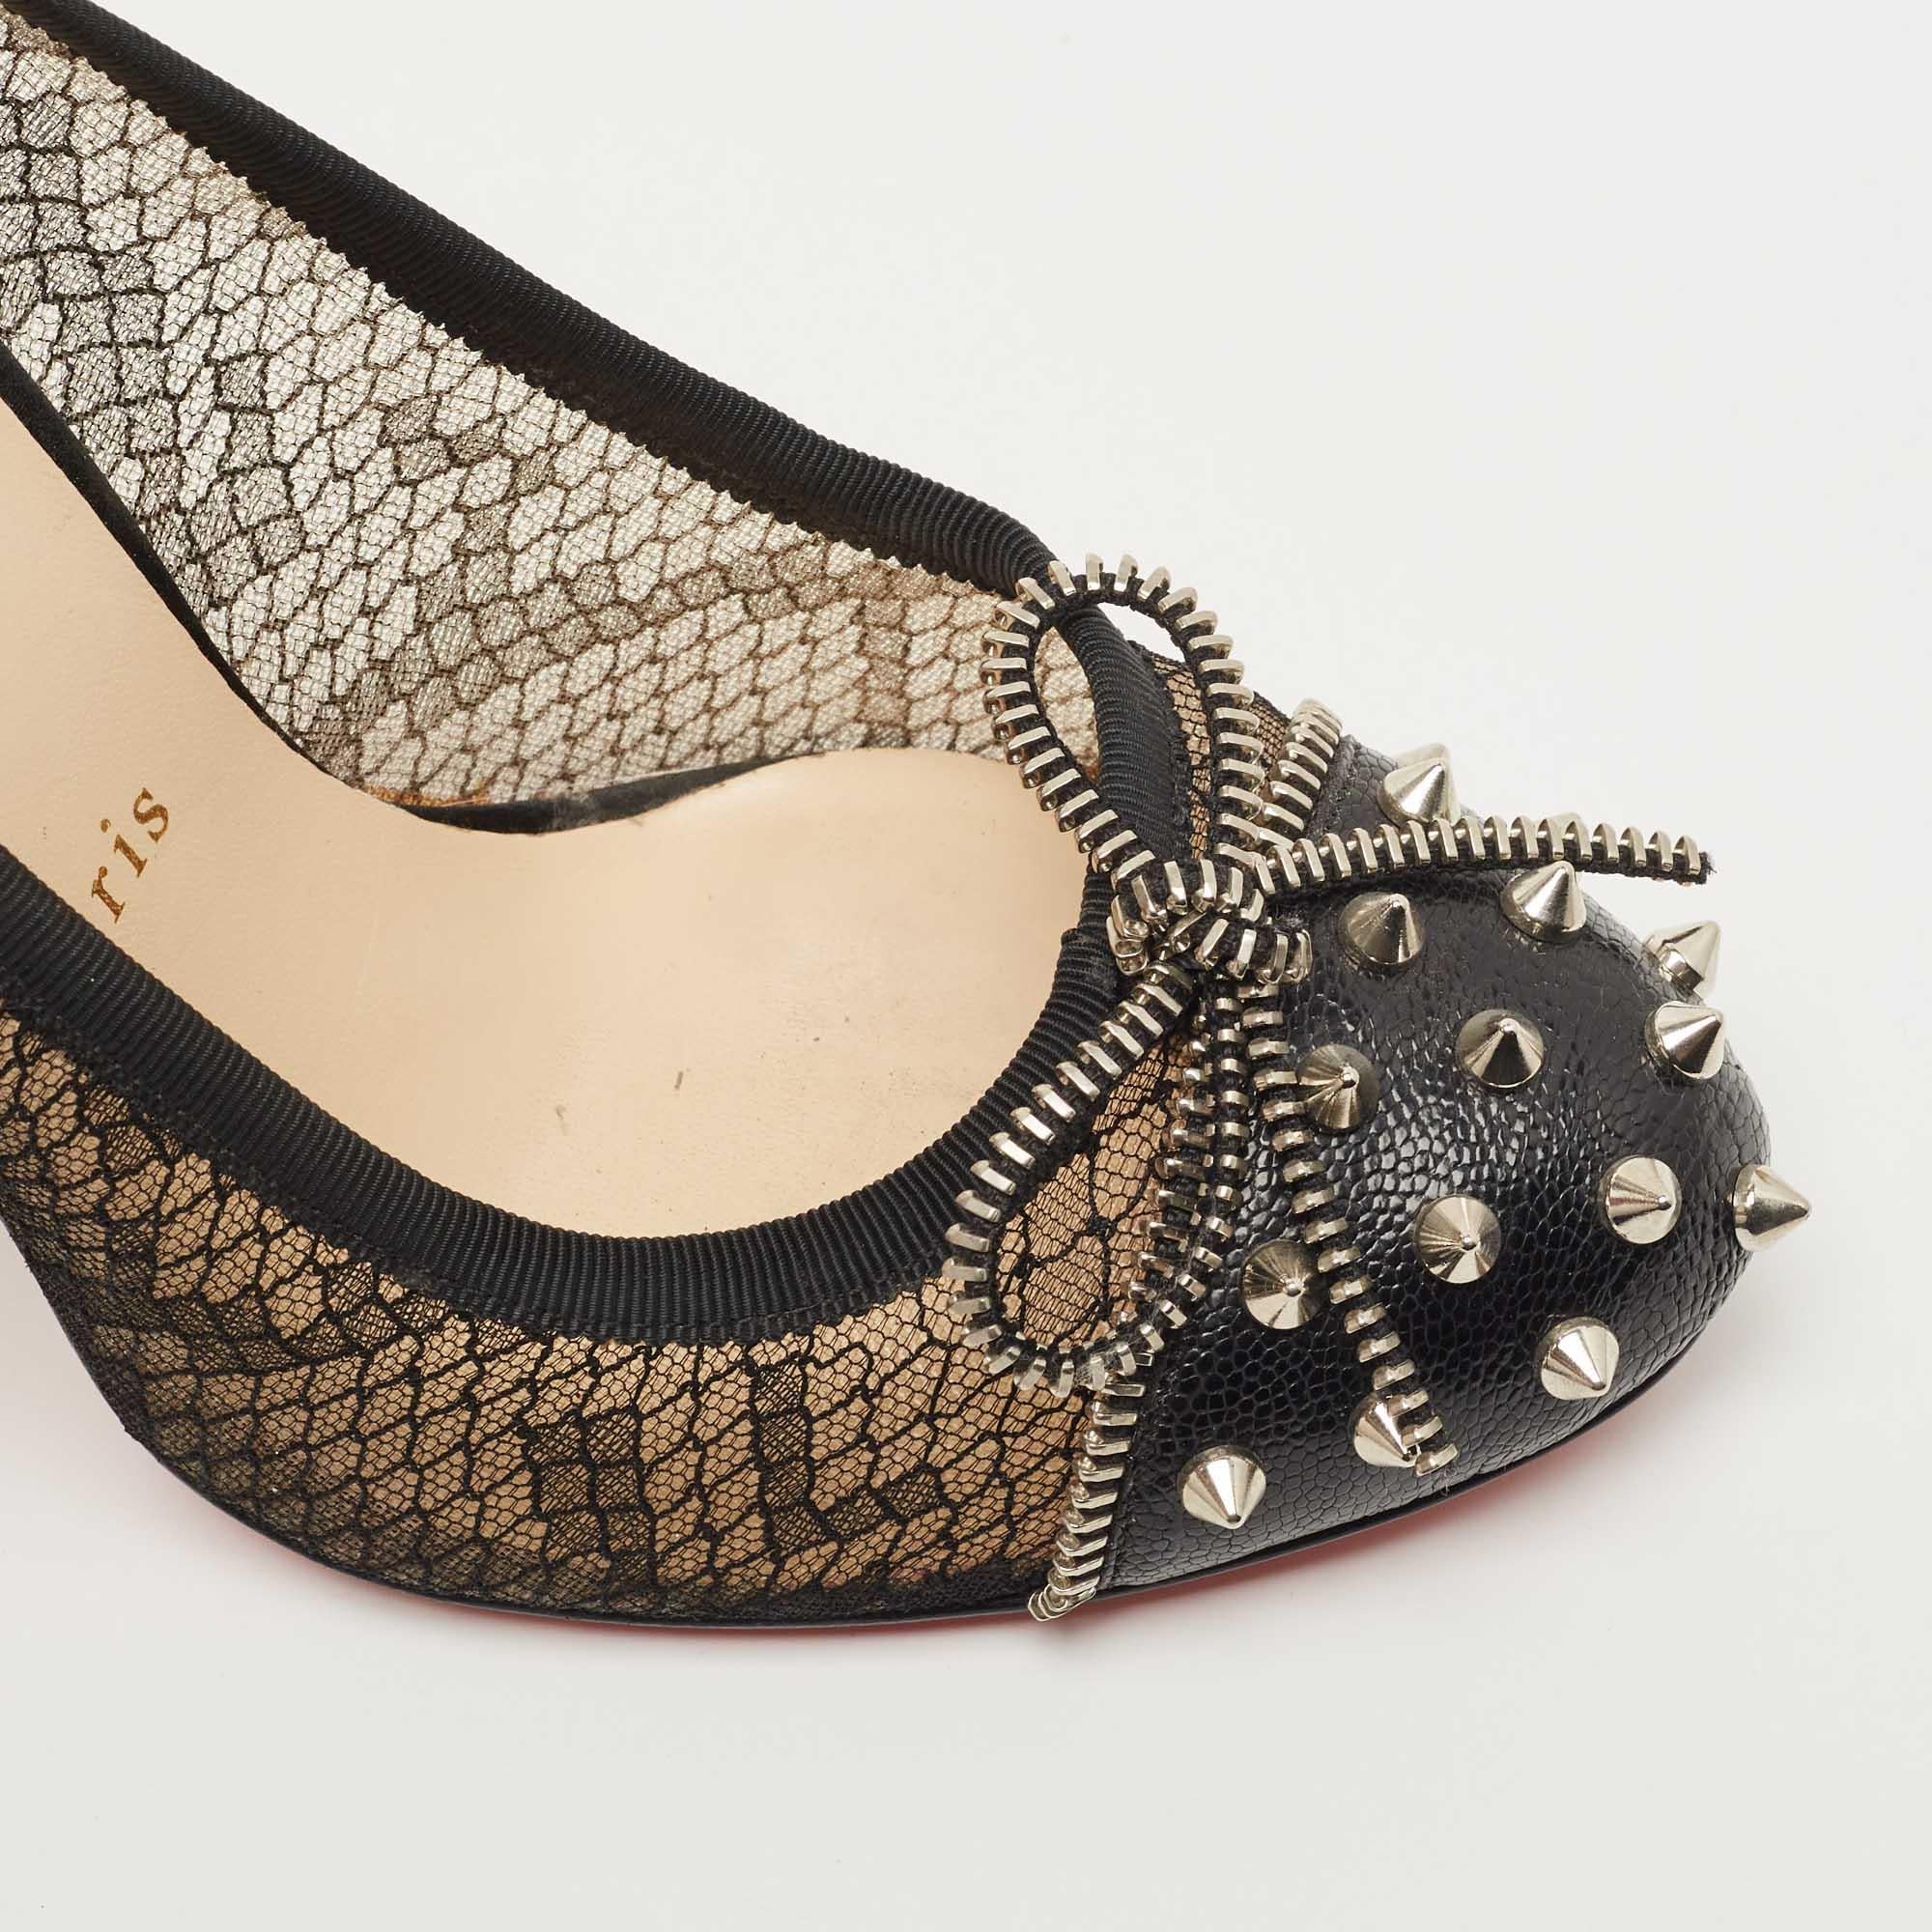 Christian Louboutin Black Leather and Lace Candy Spiked Pumps Size 38 For Sale 2